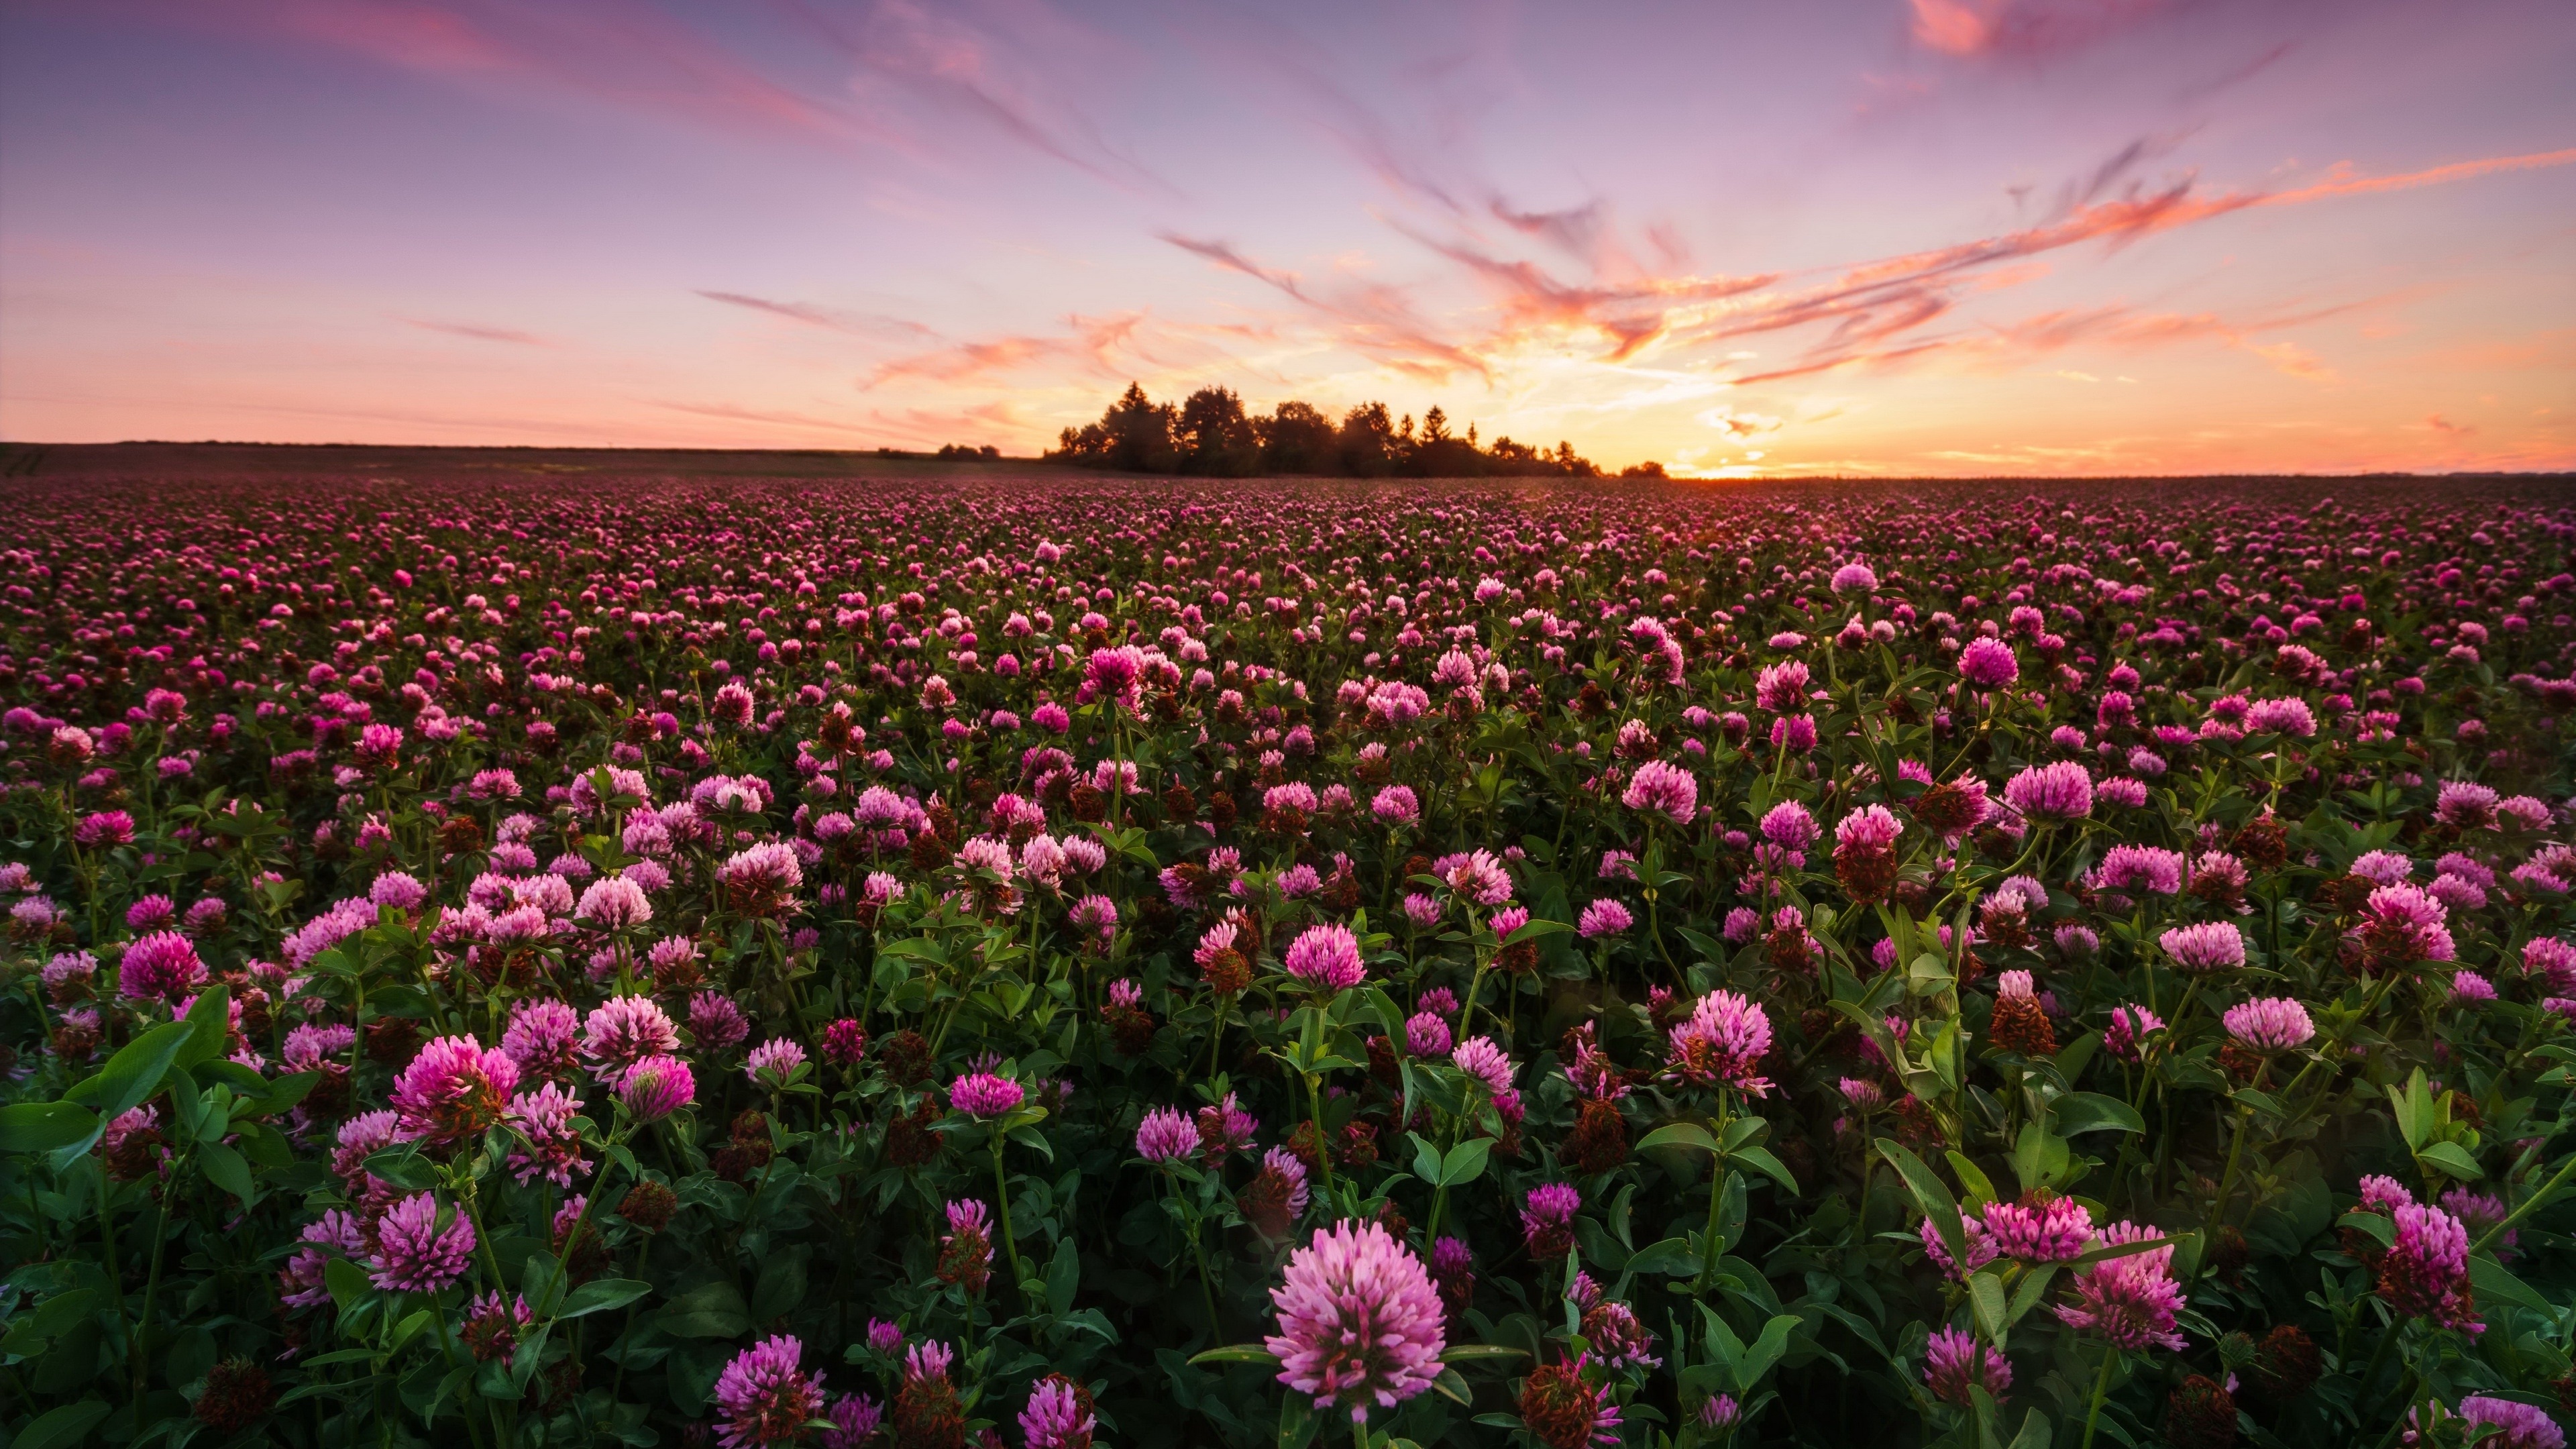 Flower Field: The red clover, A herbaceous species of flowering plant. 3840x2160 4K Wallpaper.